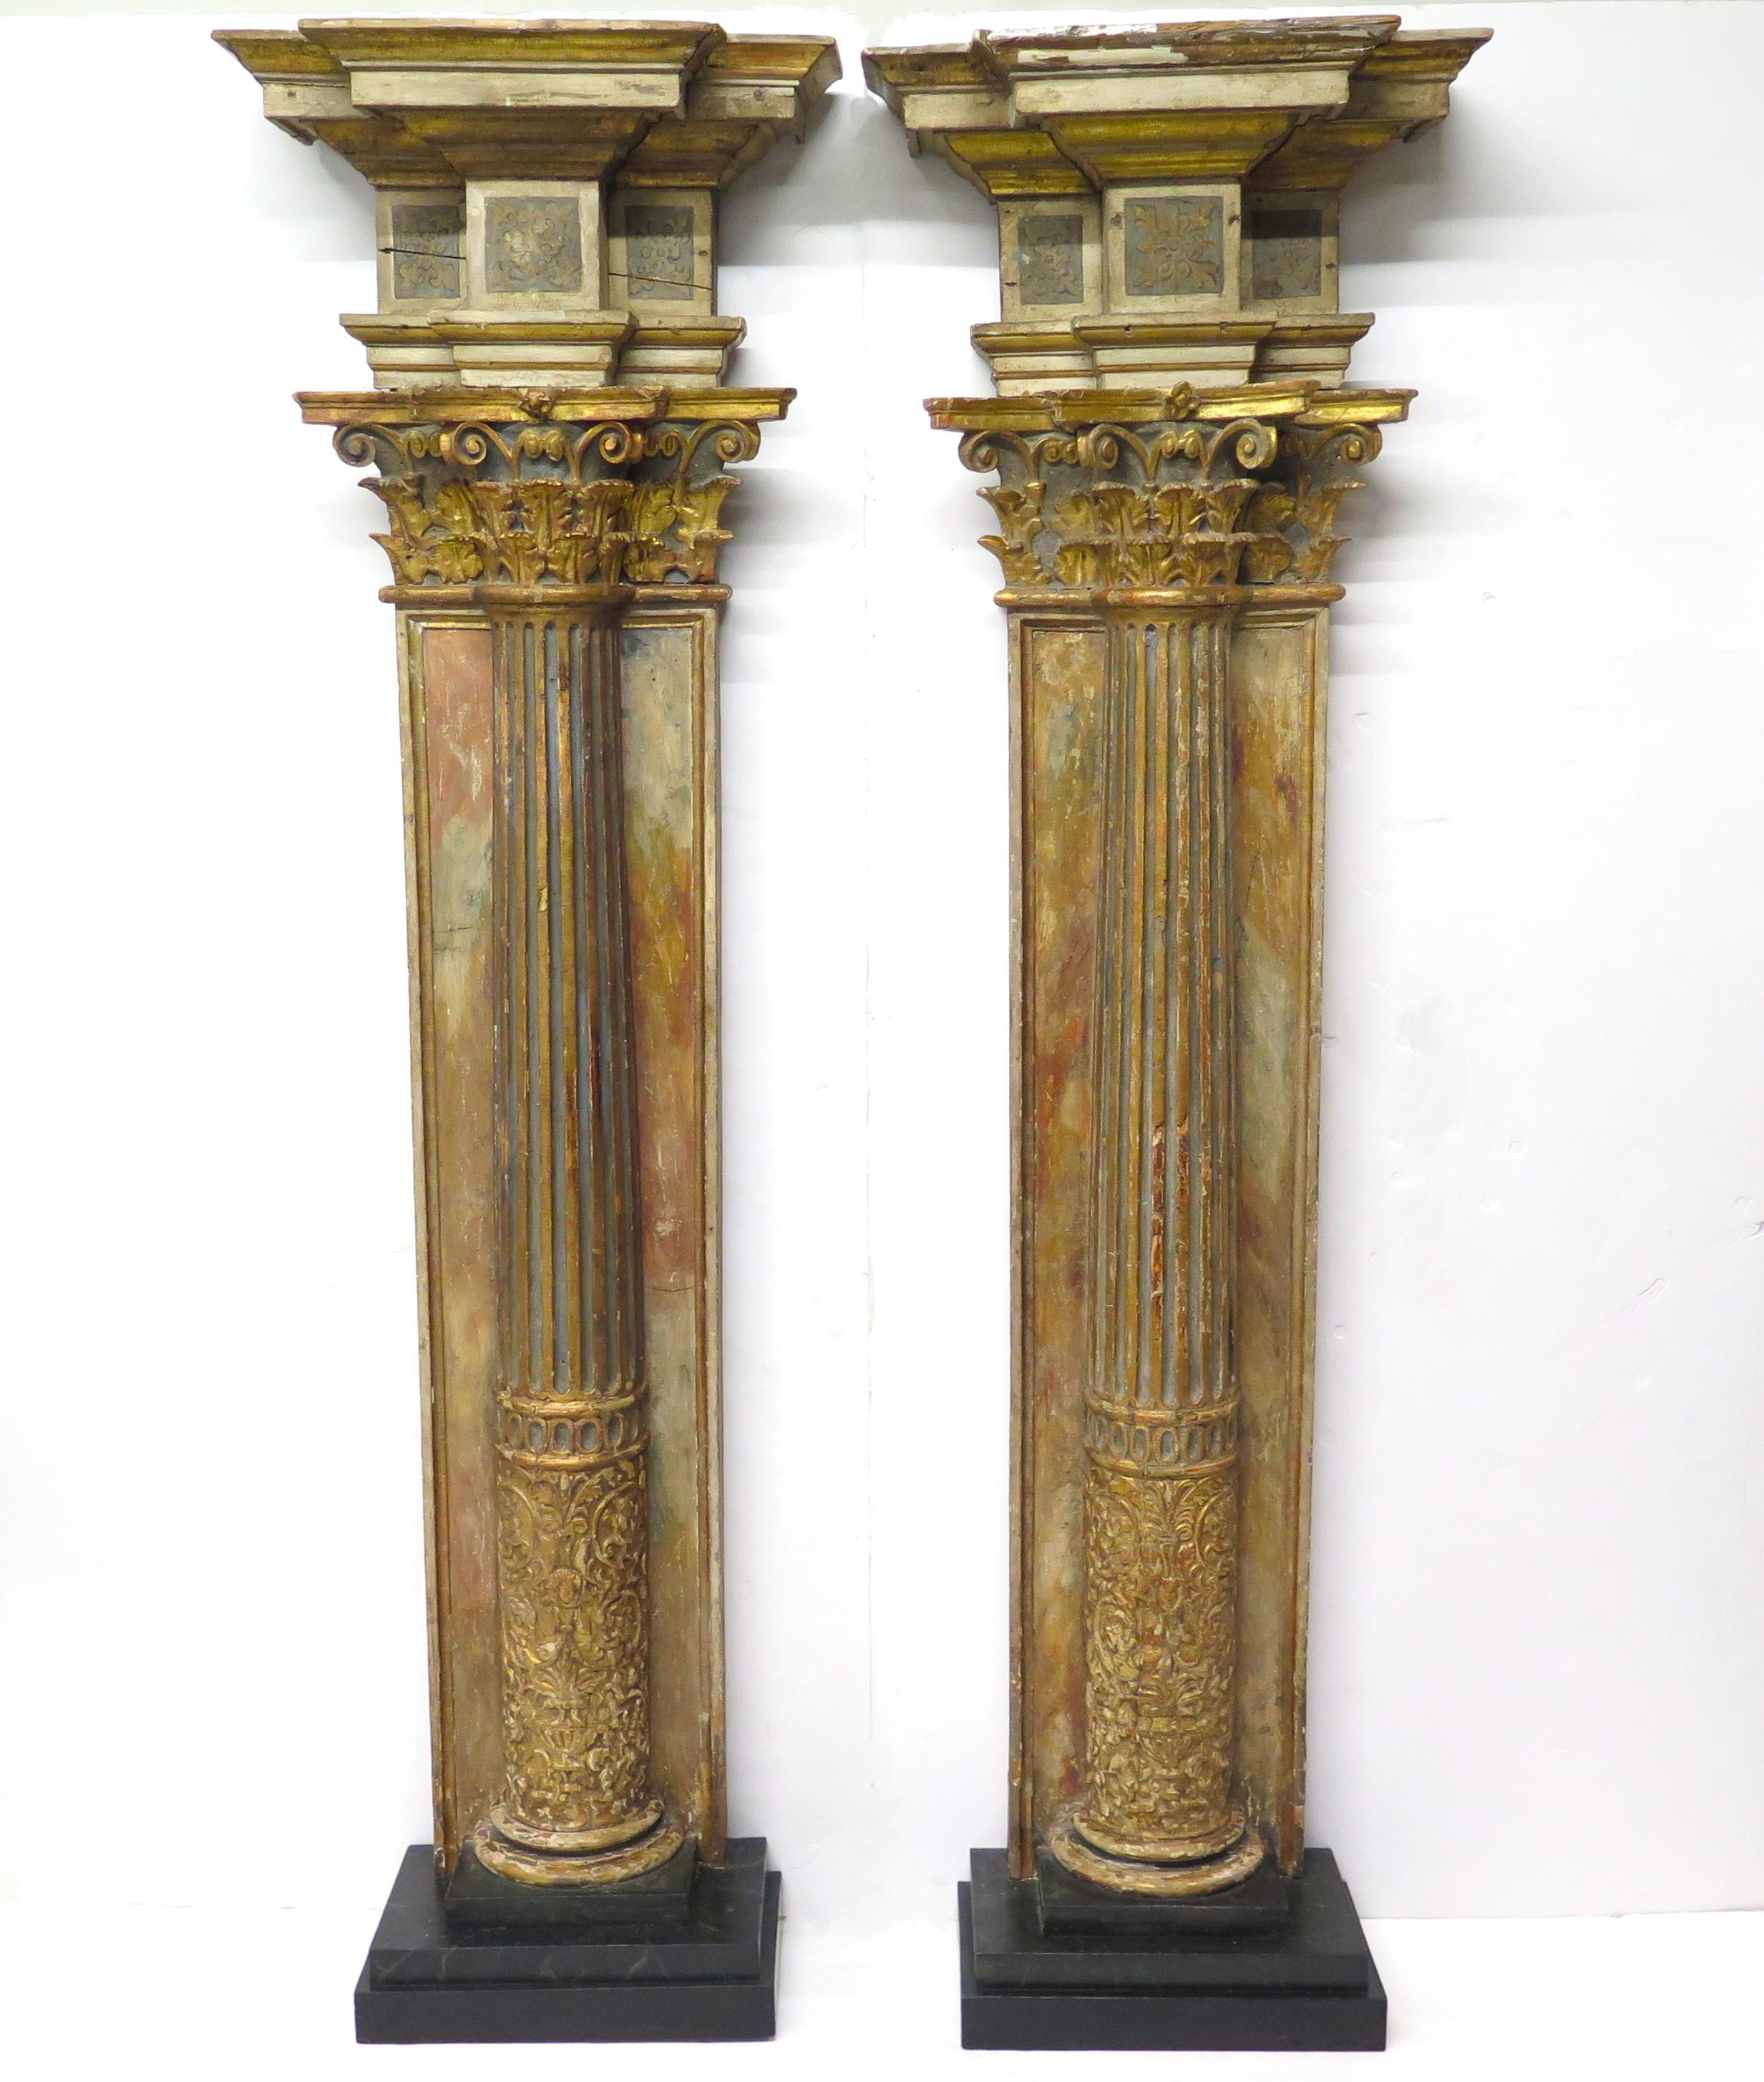 a pair of Neoclassical giltwood and polychrome decorated fluted Corinthian three quarter columns / architectural elements, Italy, early 19th century

93.25